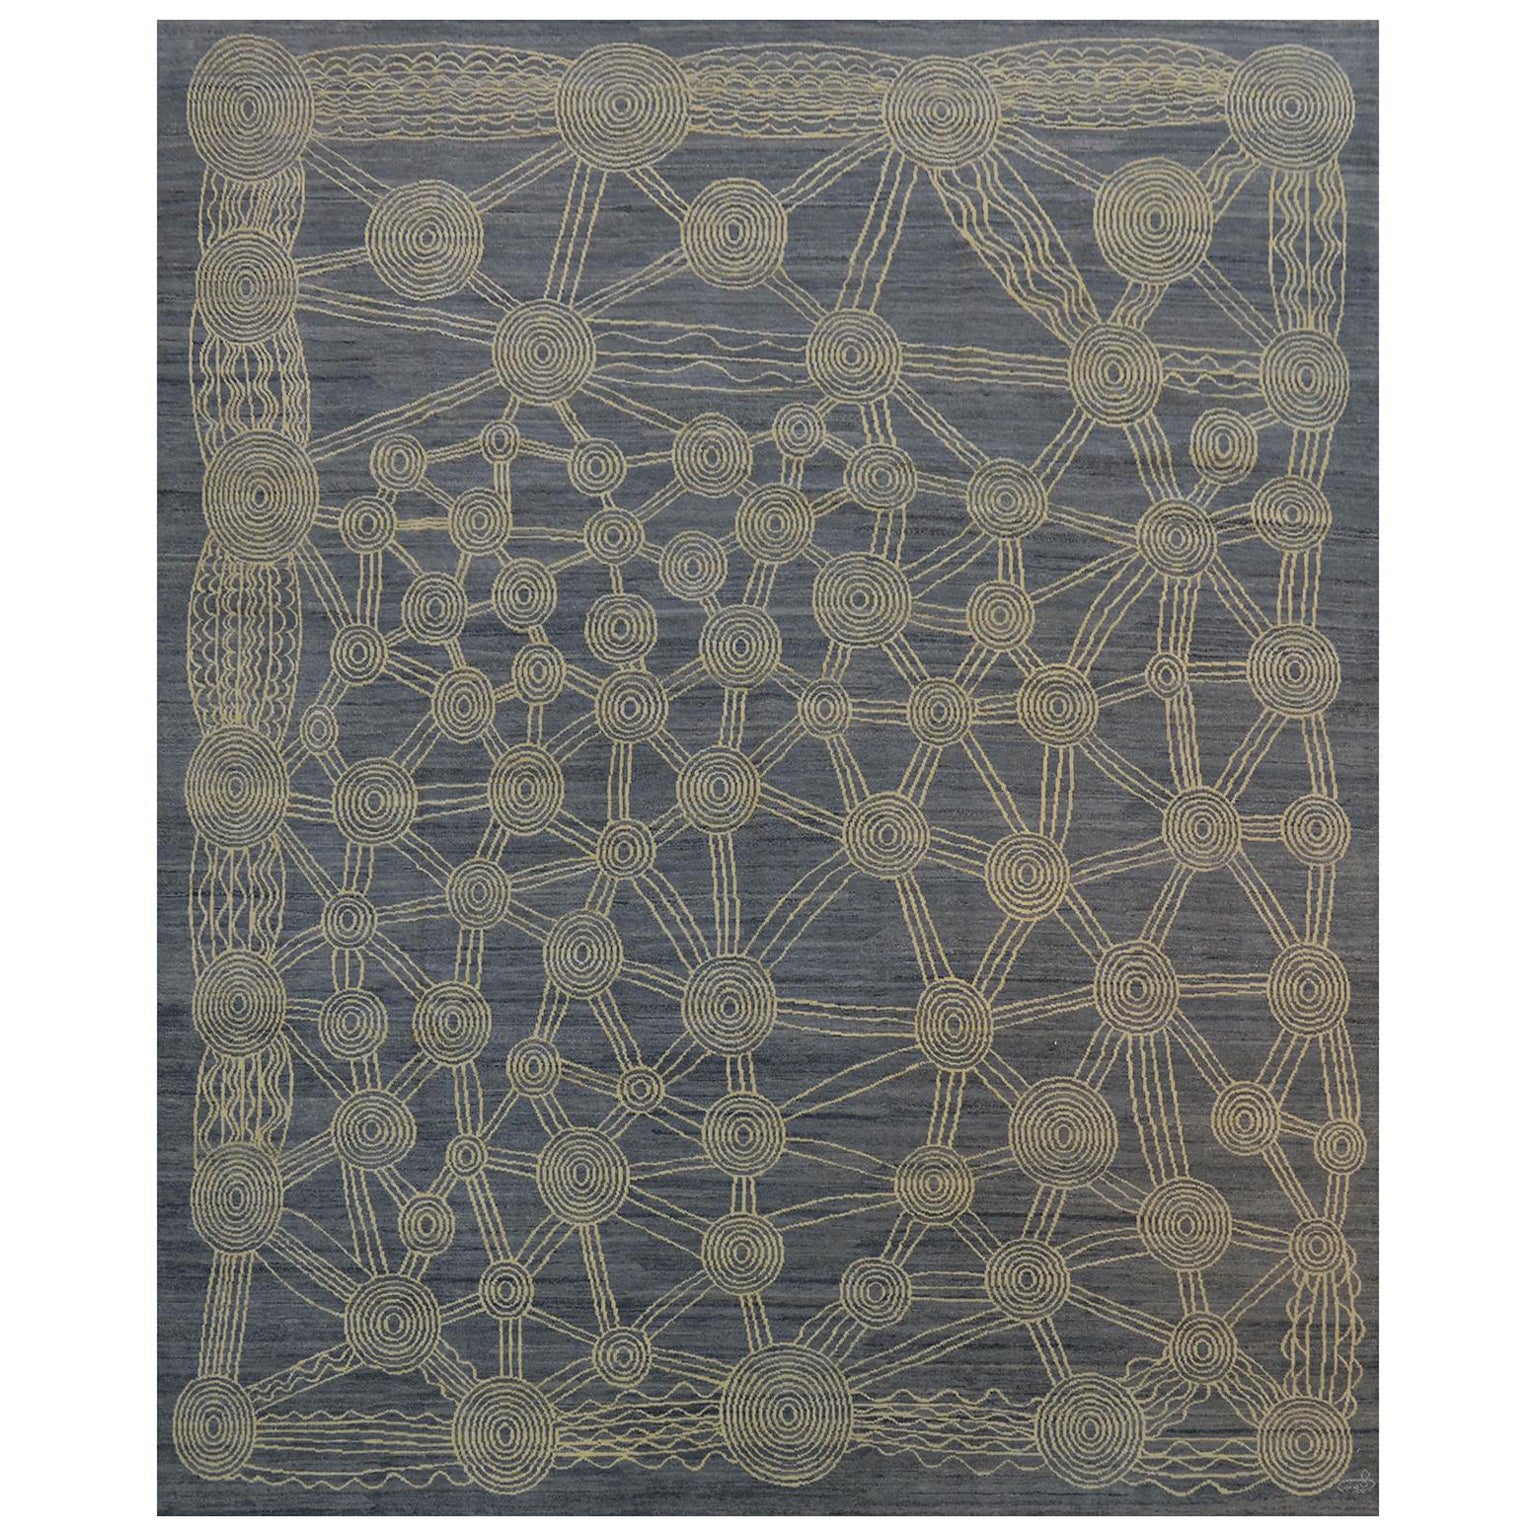 Contemporary Wool Persian Rug in Gray and Cream, Orley Shabahang, 8' x 10'